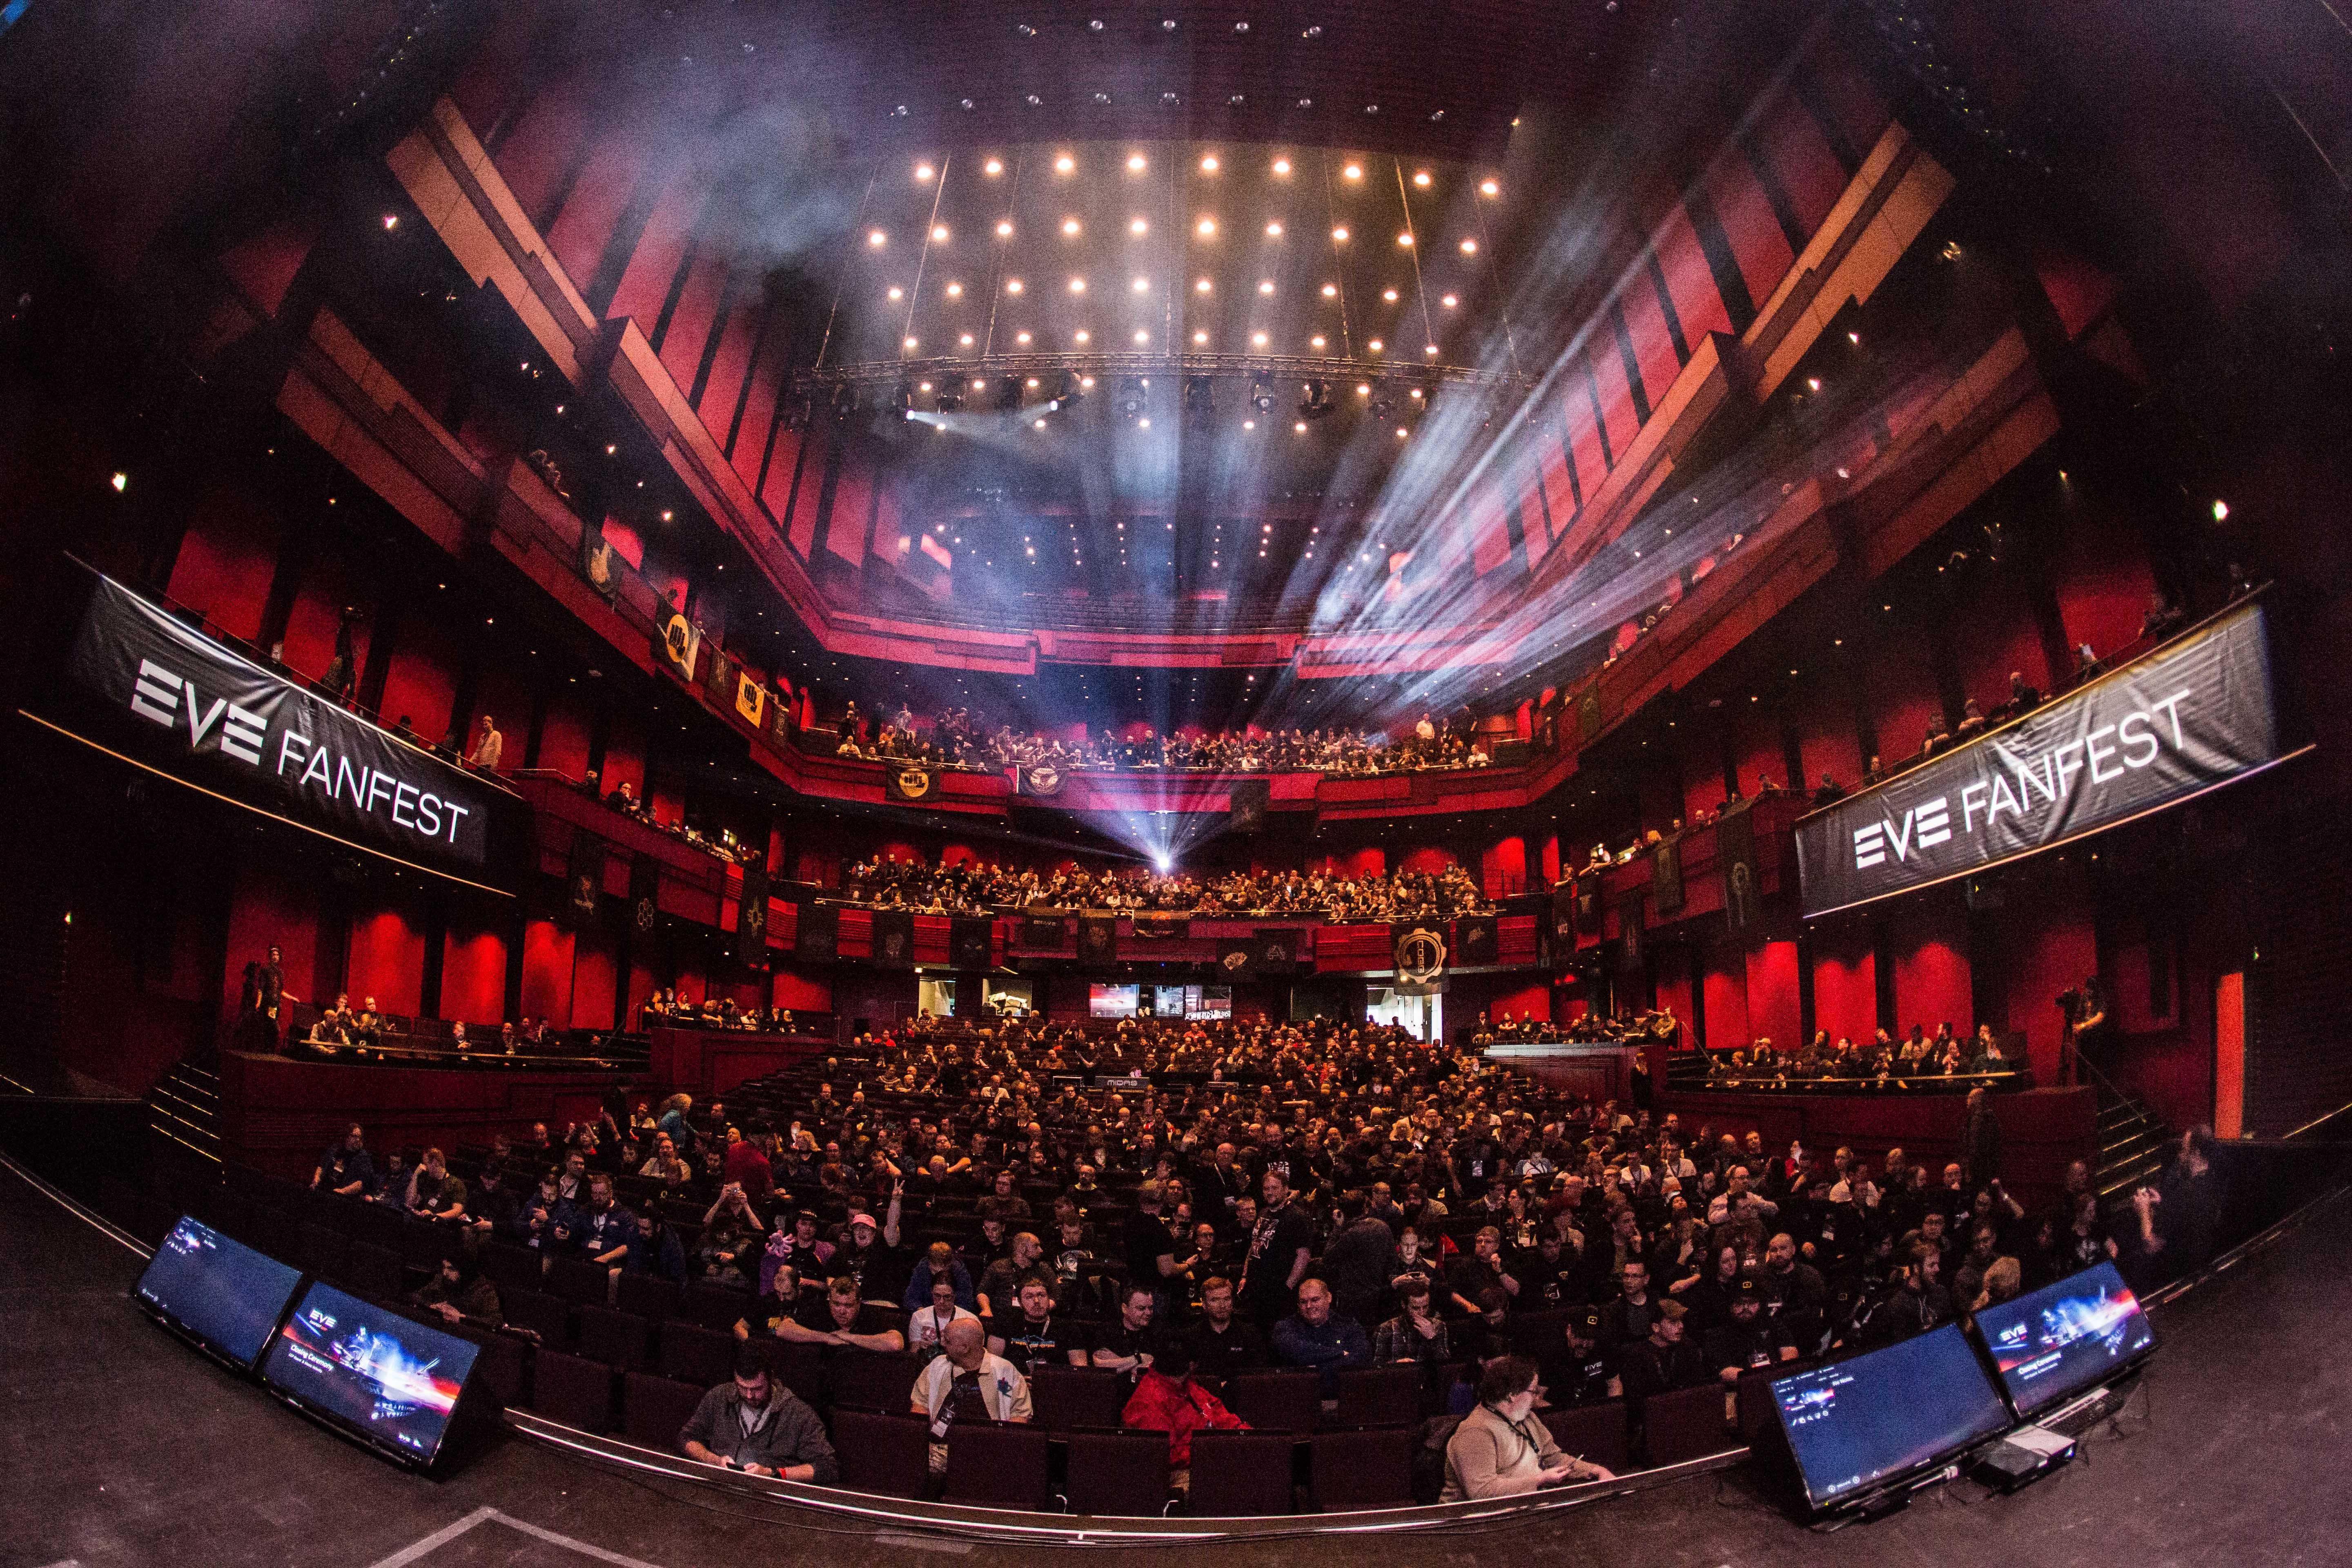 (Eve Fanfest is where the community comes together. The annual event is used by developer CCP to announce new updates and interact with its fans).